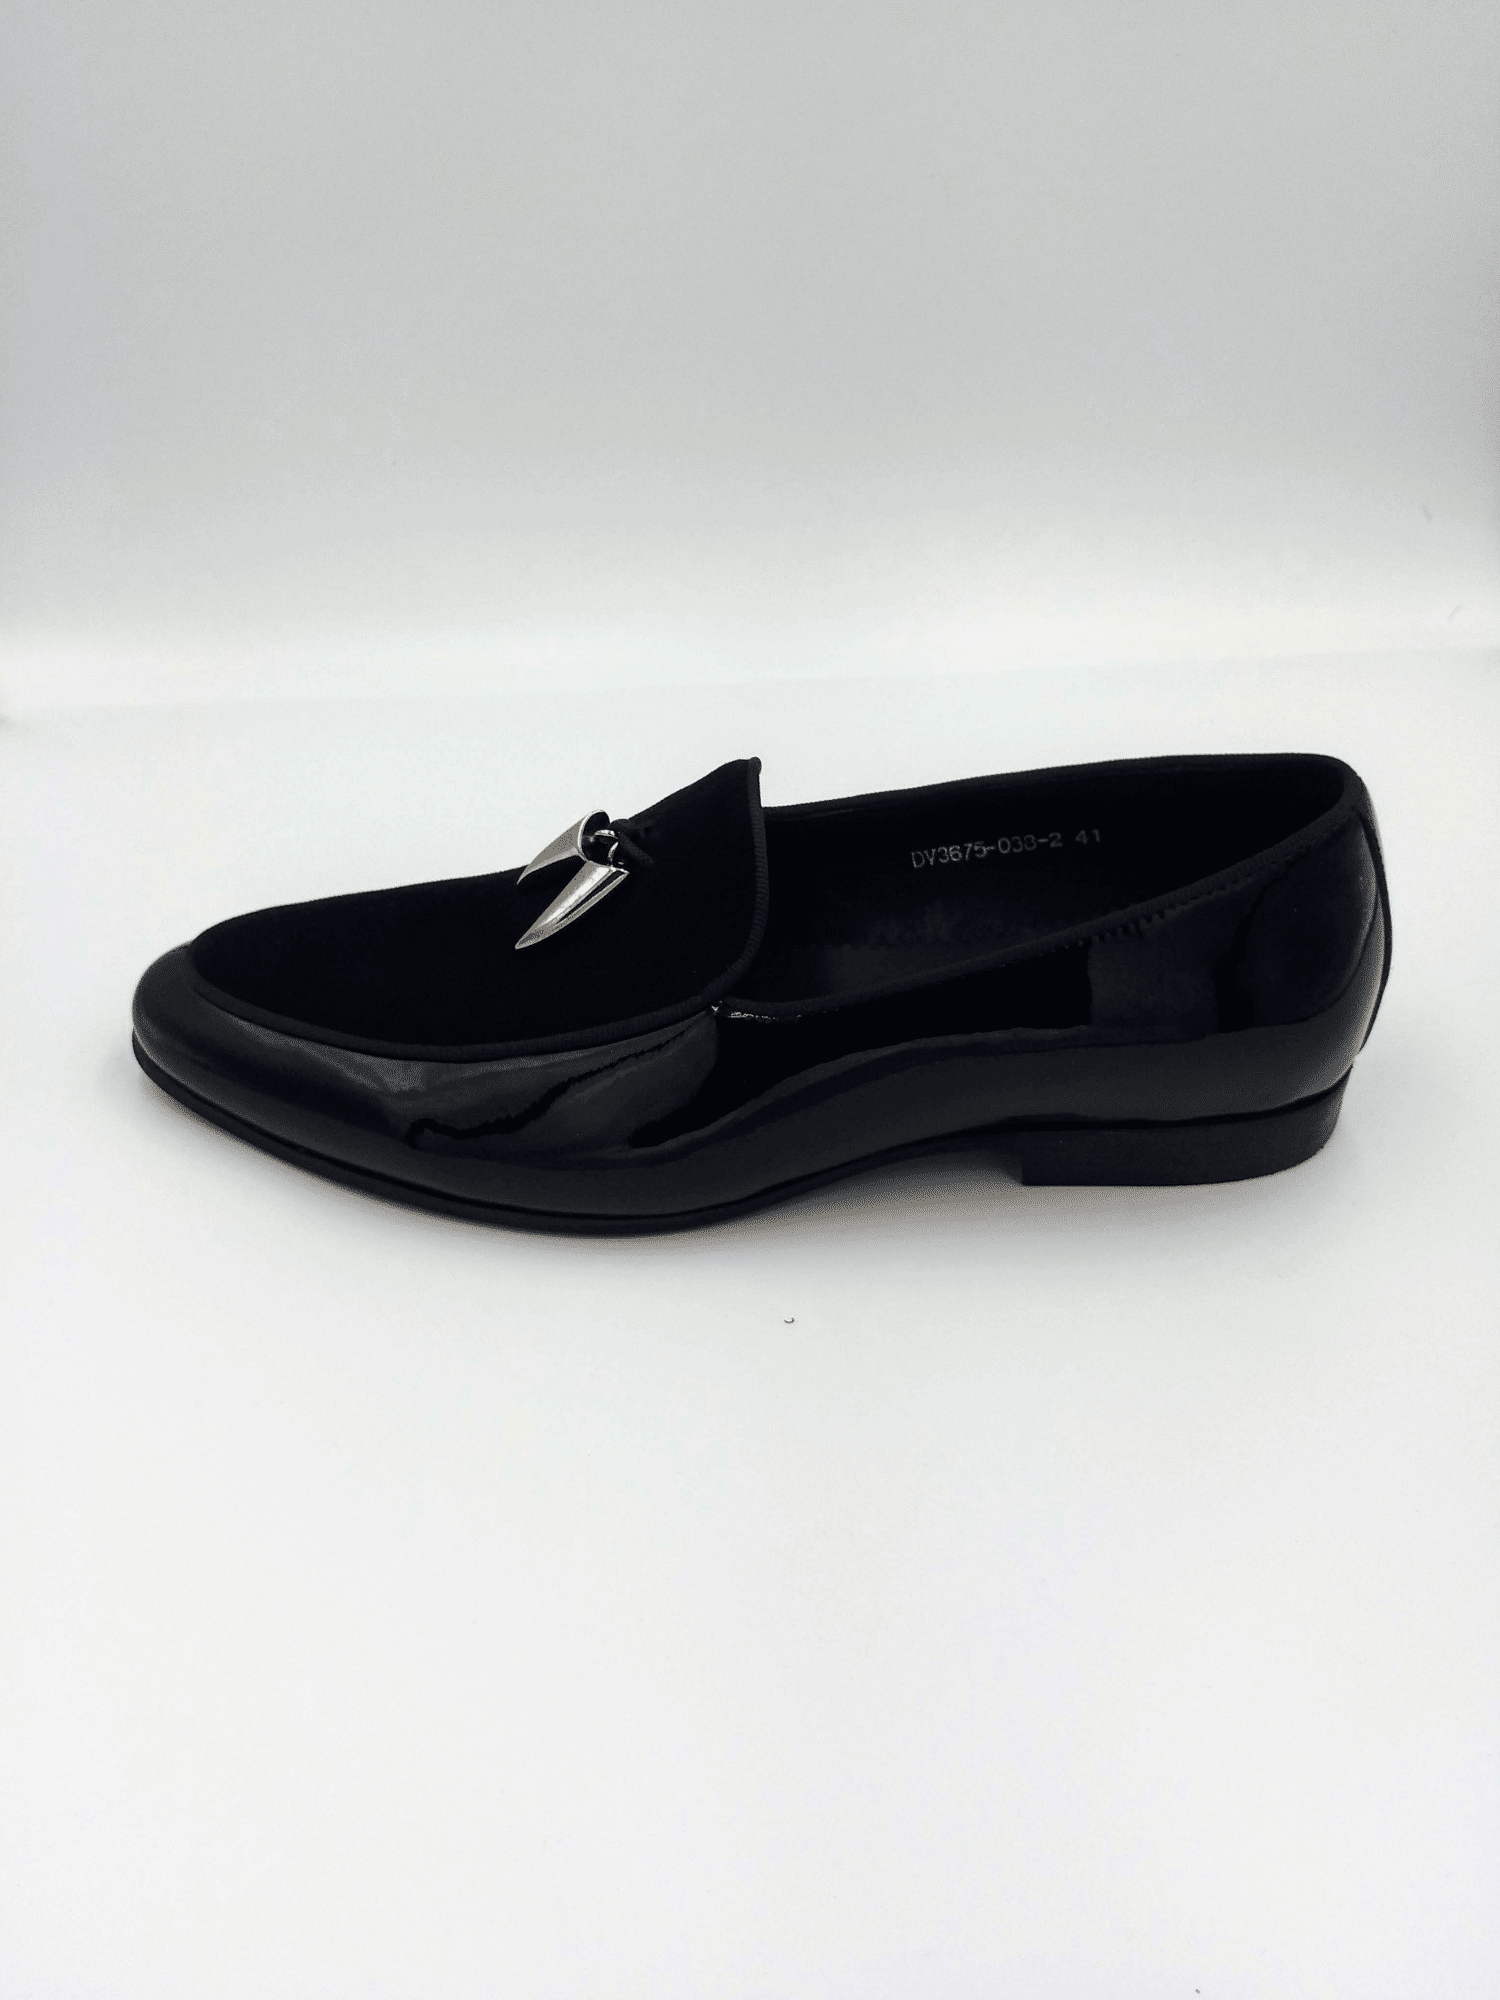 patent black loafers mens